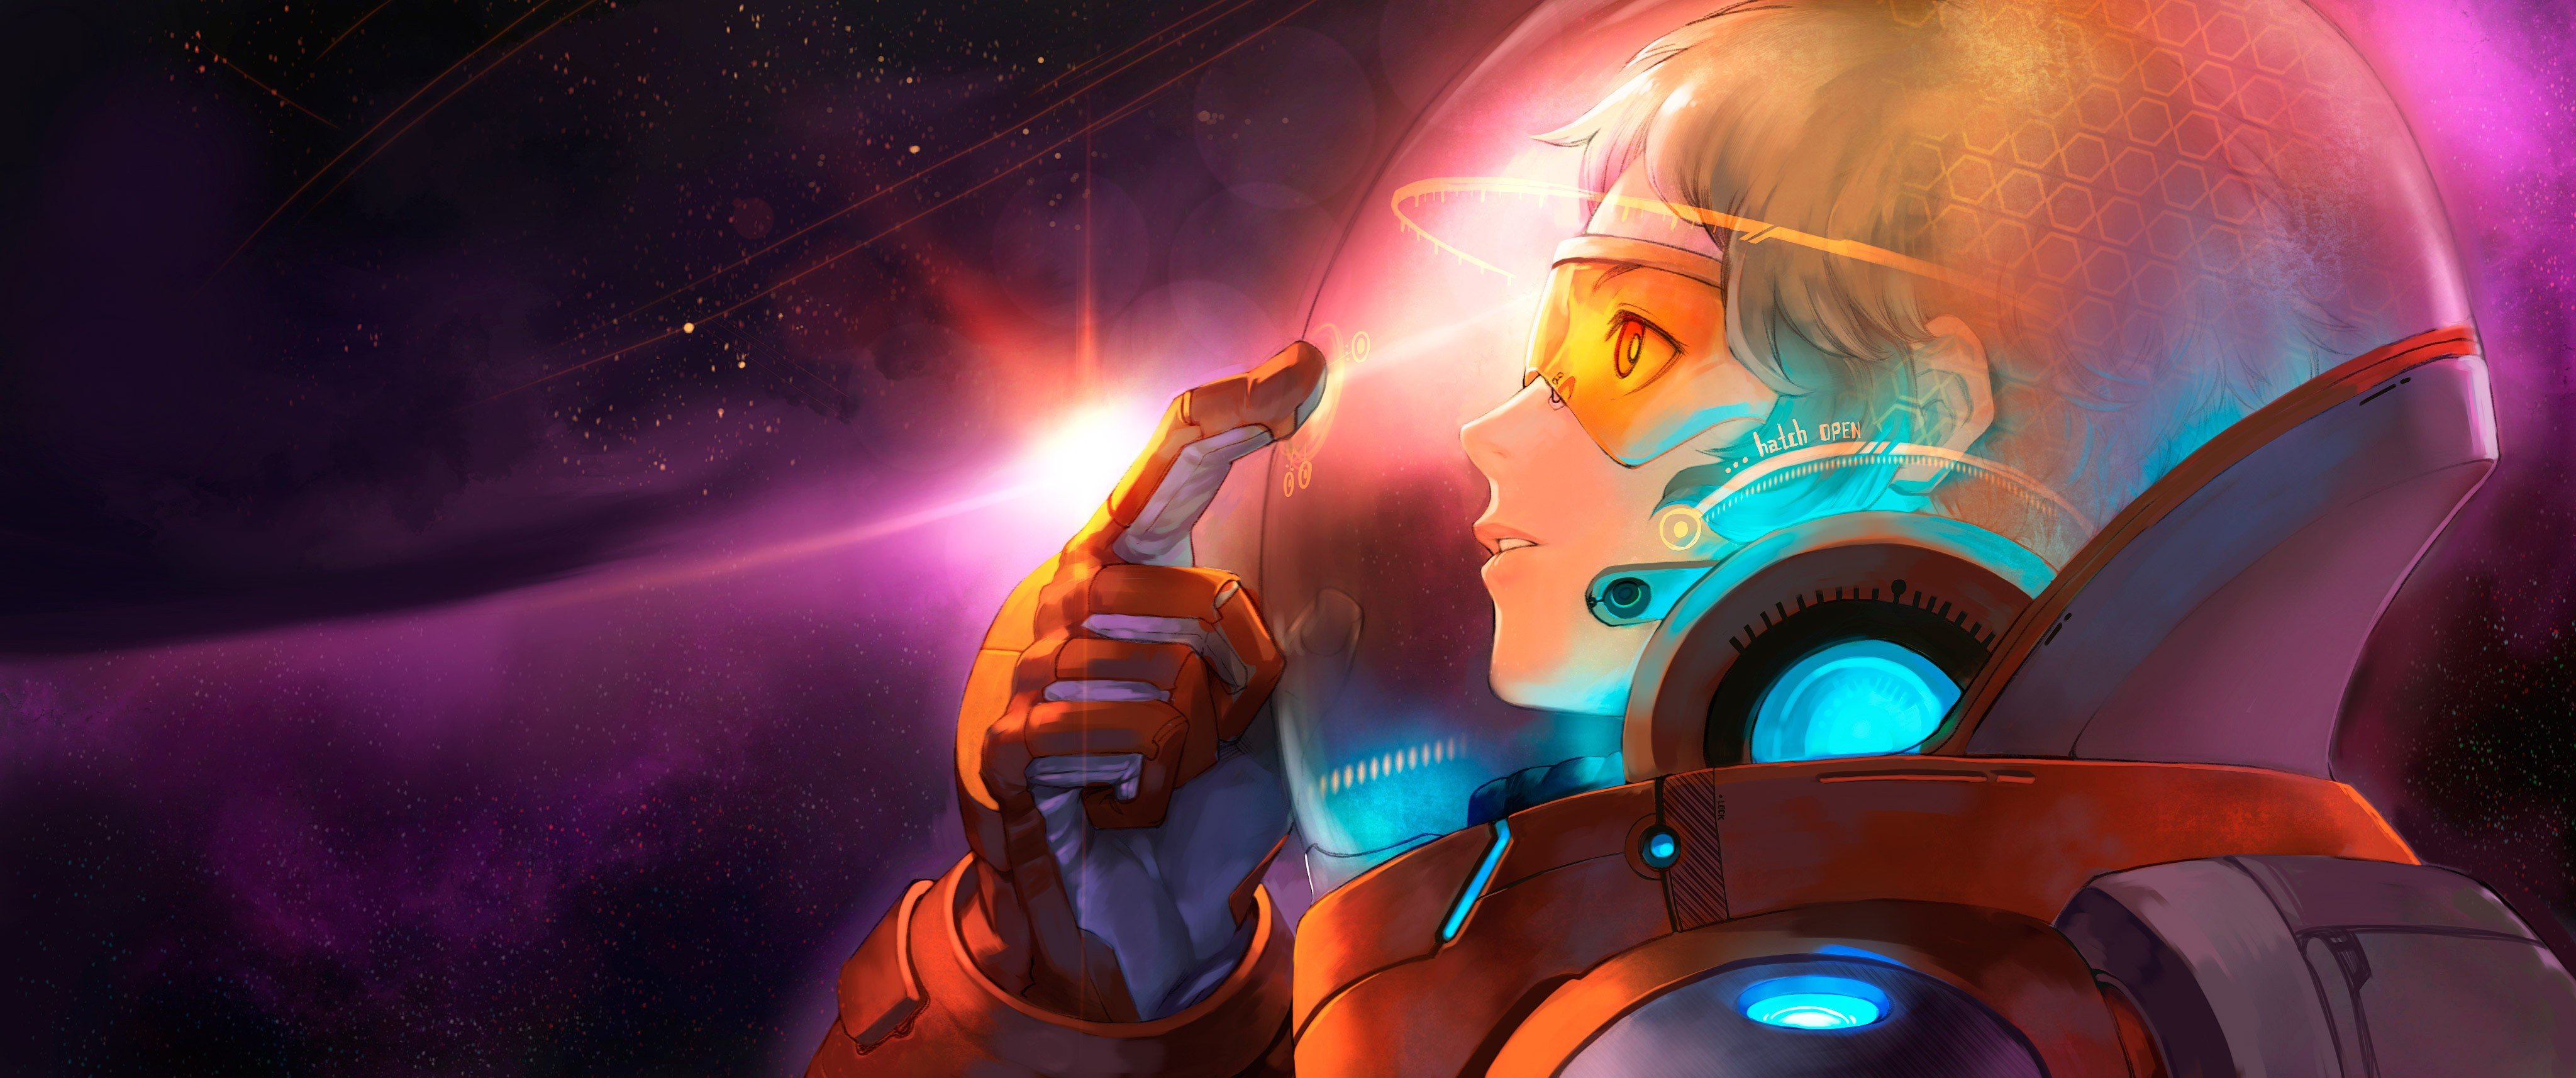 space suit, Anime, Anime girls, Space Wallpaper